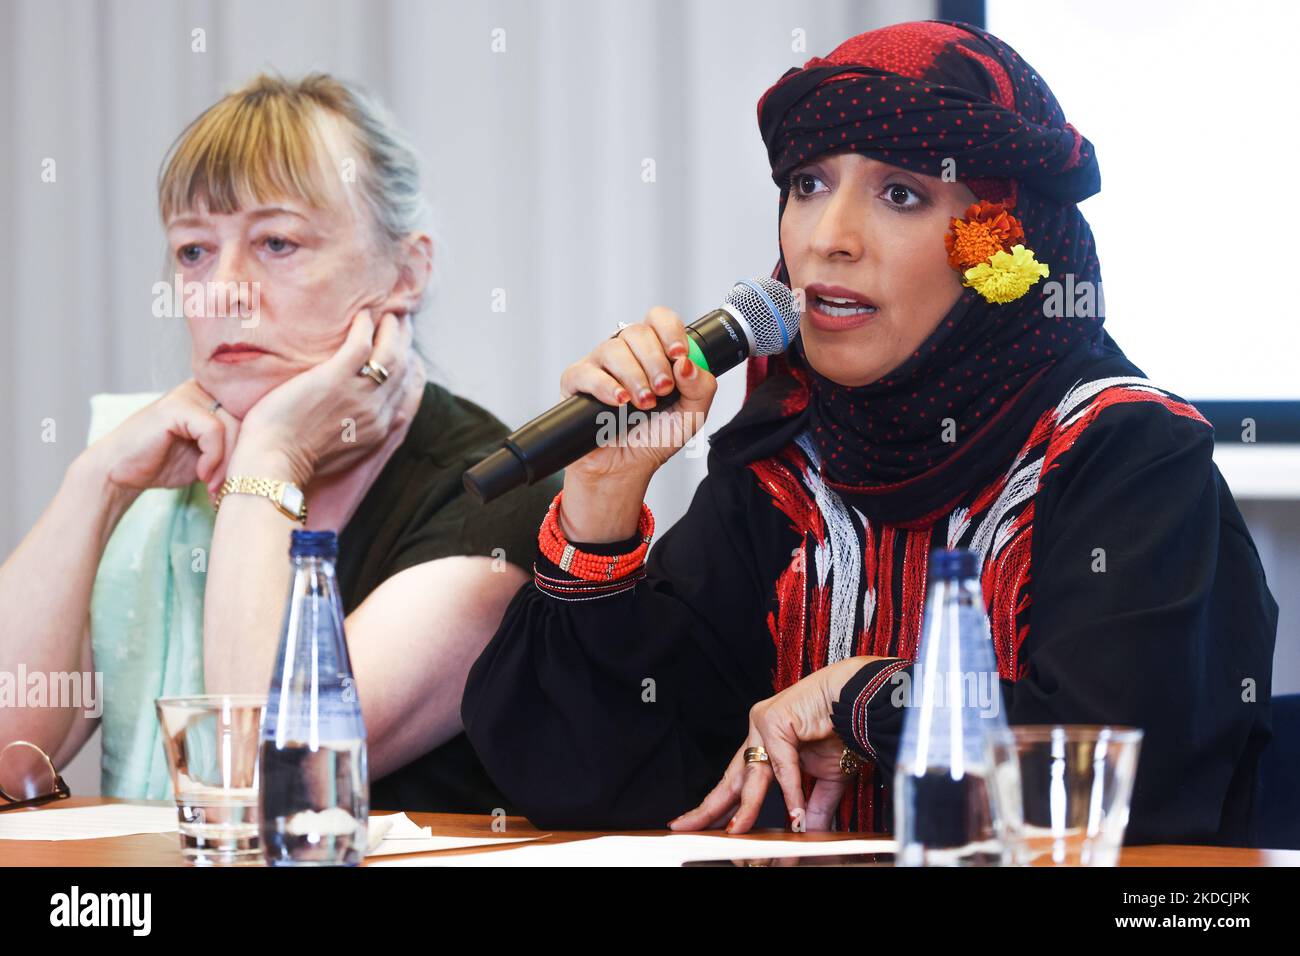 Nobel peace laureates Jody Williams (US) and Tawakkol Karman (Yemen) are seen during a press conference in Sheraton Hotel in Krakow, Poland on June 23, 2022. During a delegation to Poland and Ukraine, three women Nobel winners were calling for immediate negotiations to end the invasion of Ukraine and to increase the power and visibility of women’s groups working globally for peace, justice and equality. (Photo by Beata Zawrzel/NurPhoto) Stock Photo